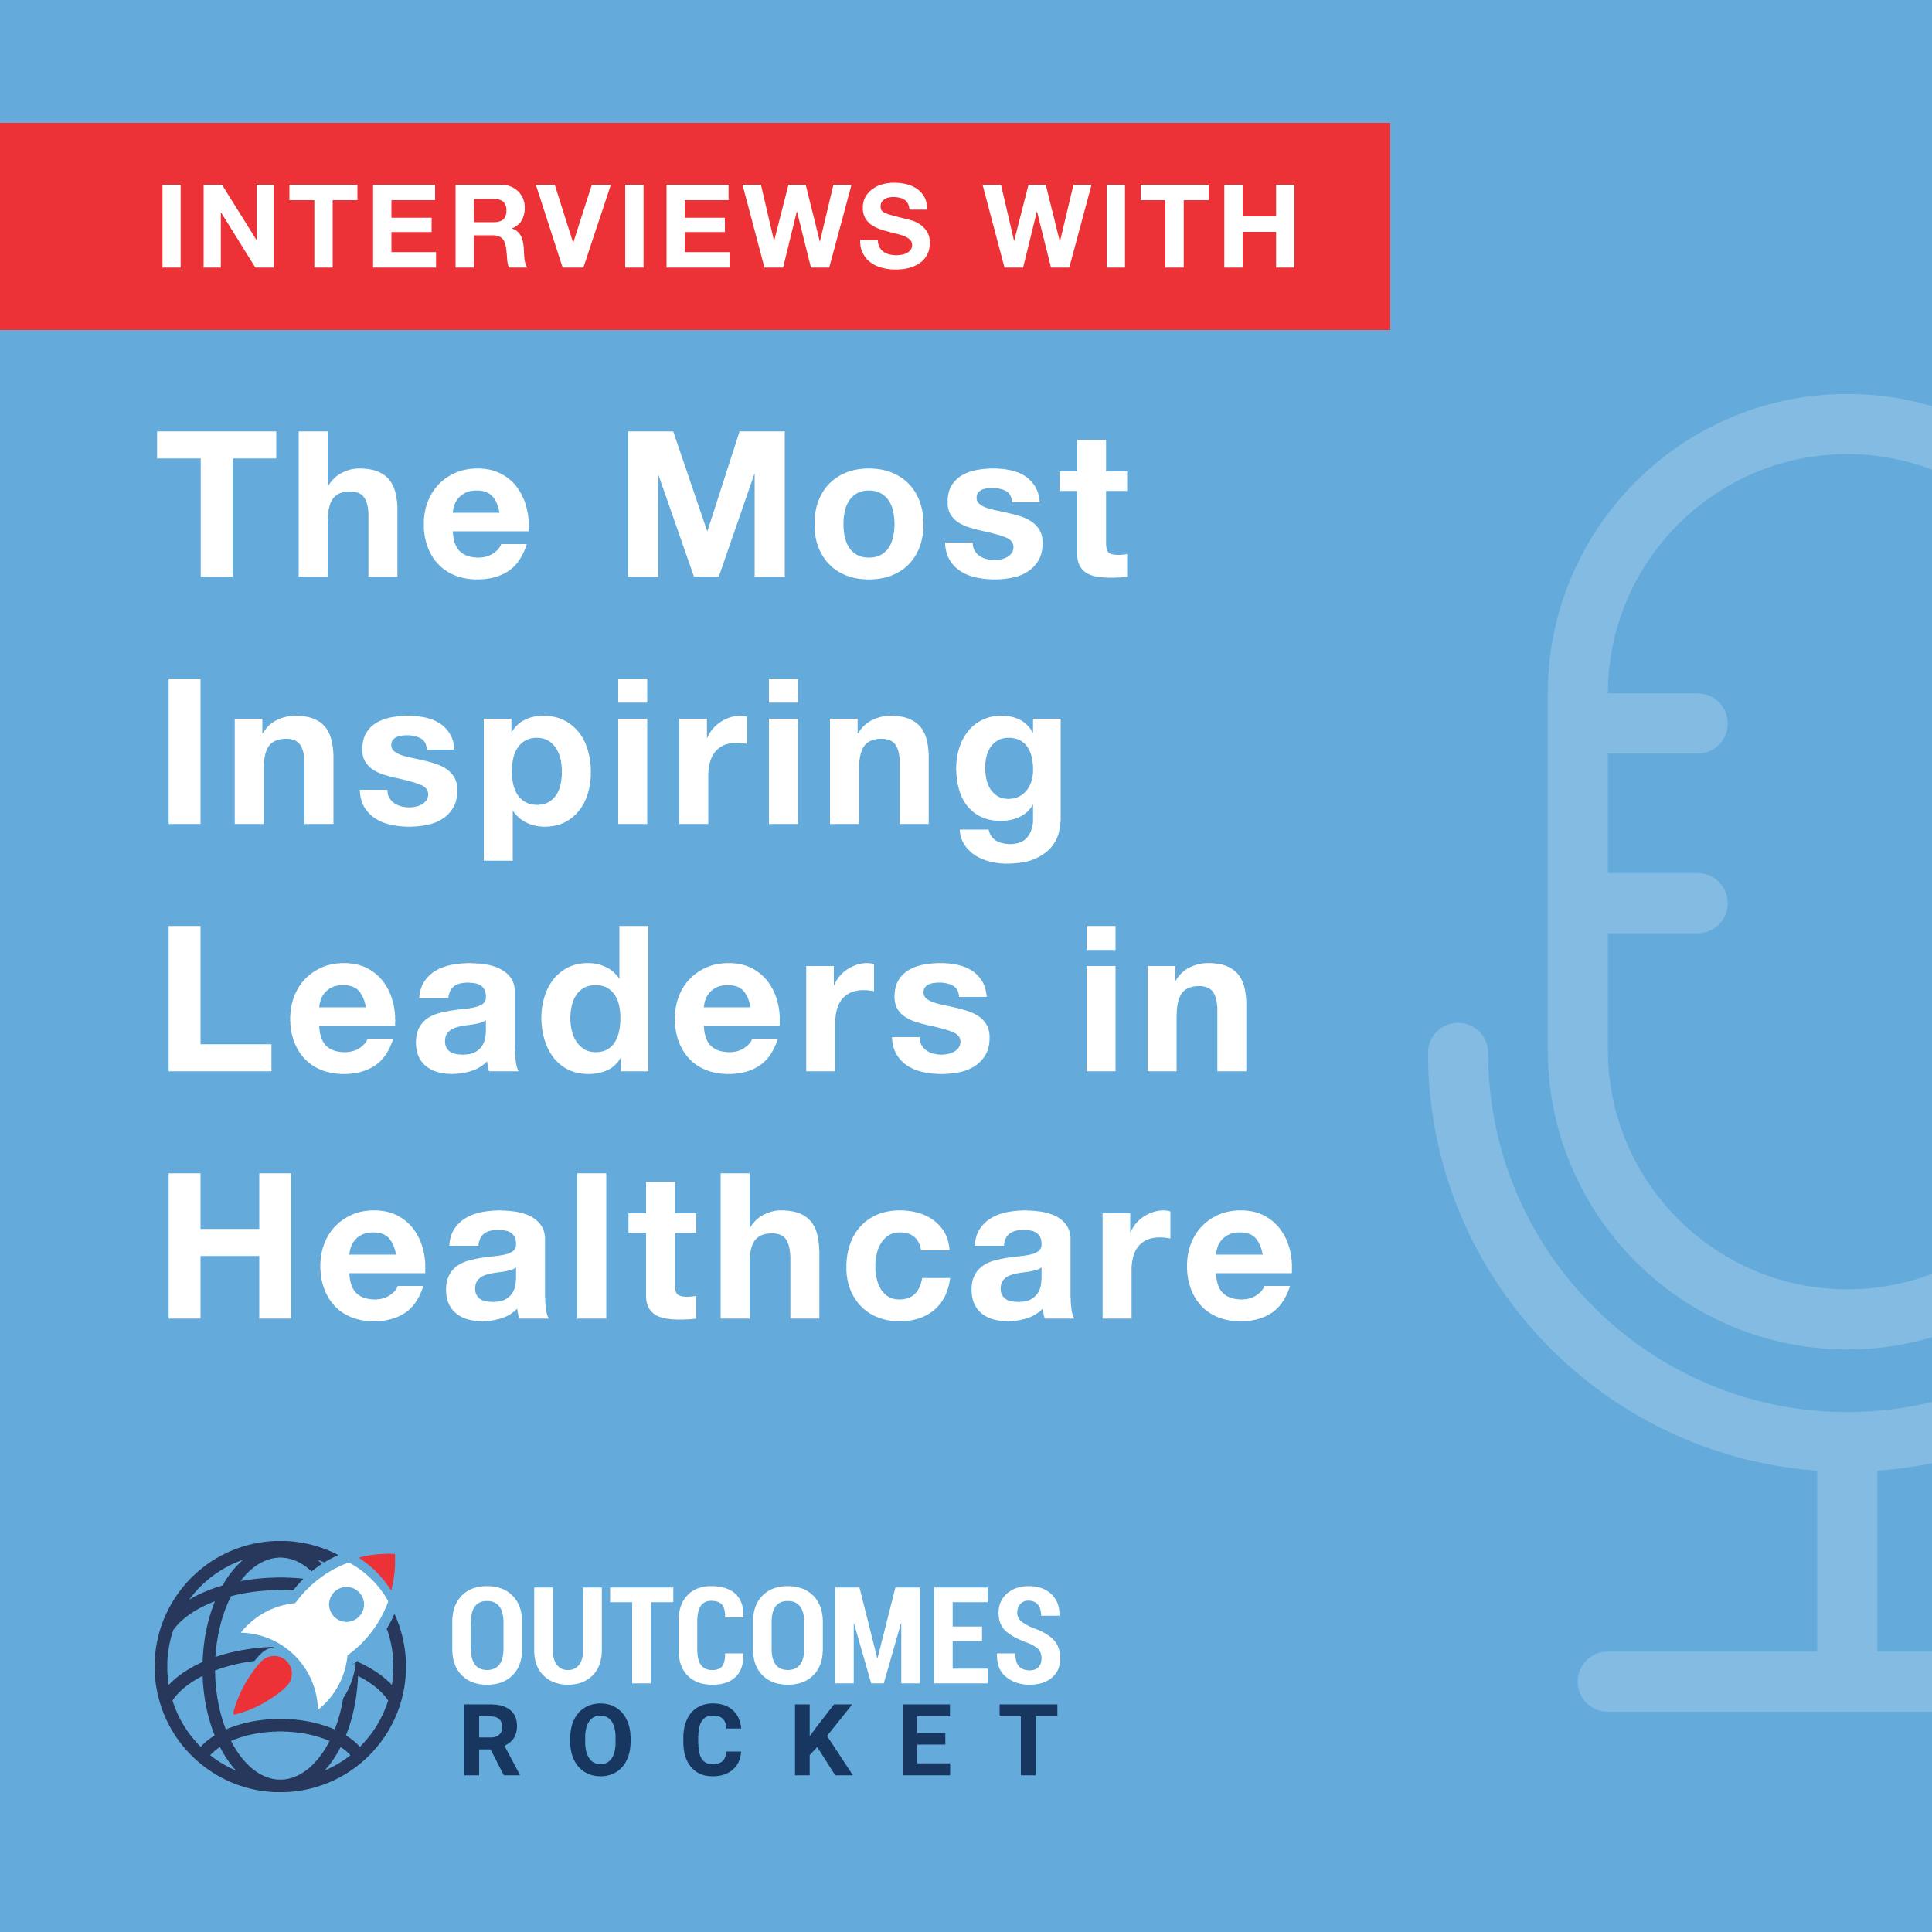 How to Strengthen Your Corporate Message in Healthcare with Ben Fox, Communications & Public Affairs Executive at GE Healthcare